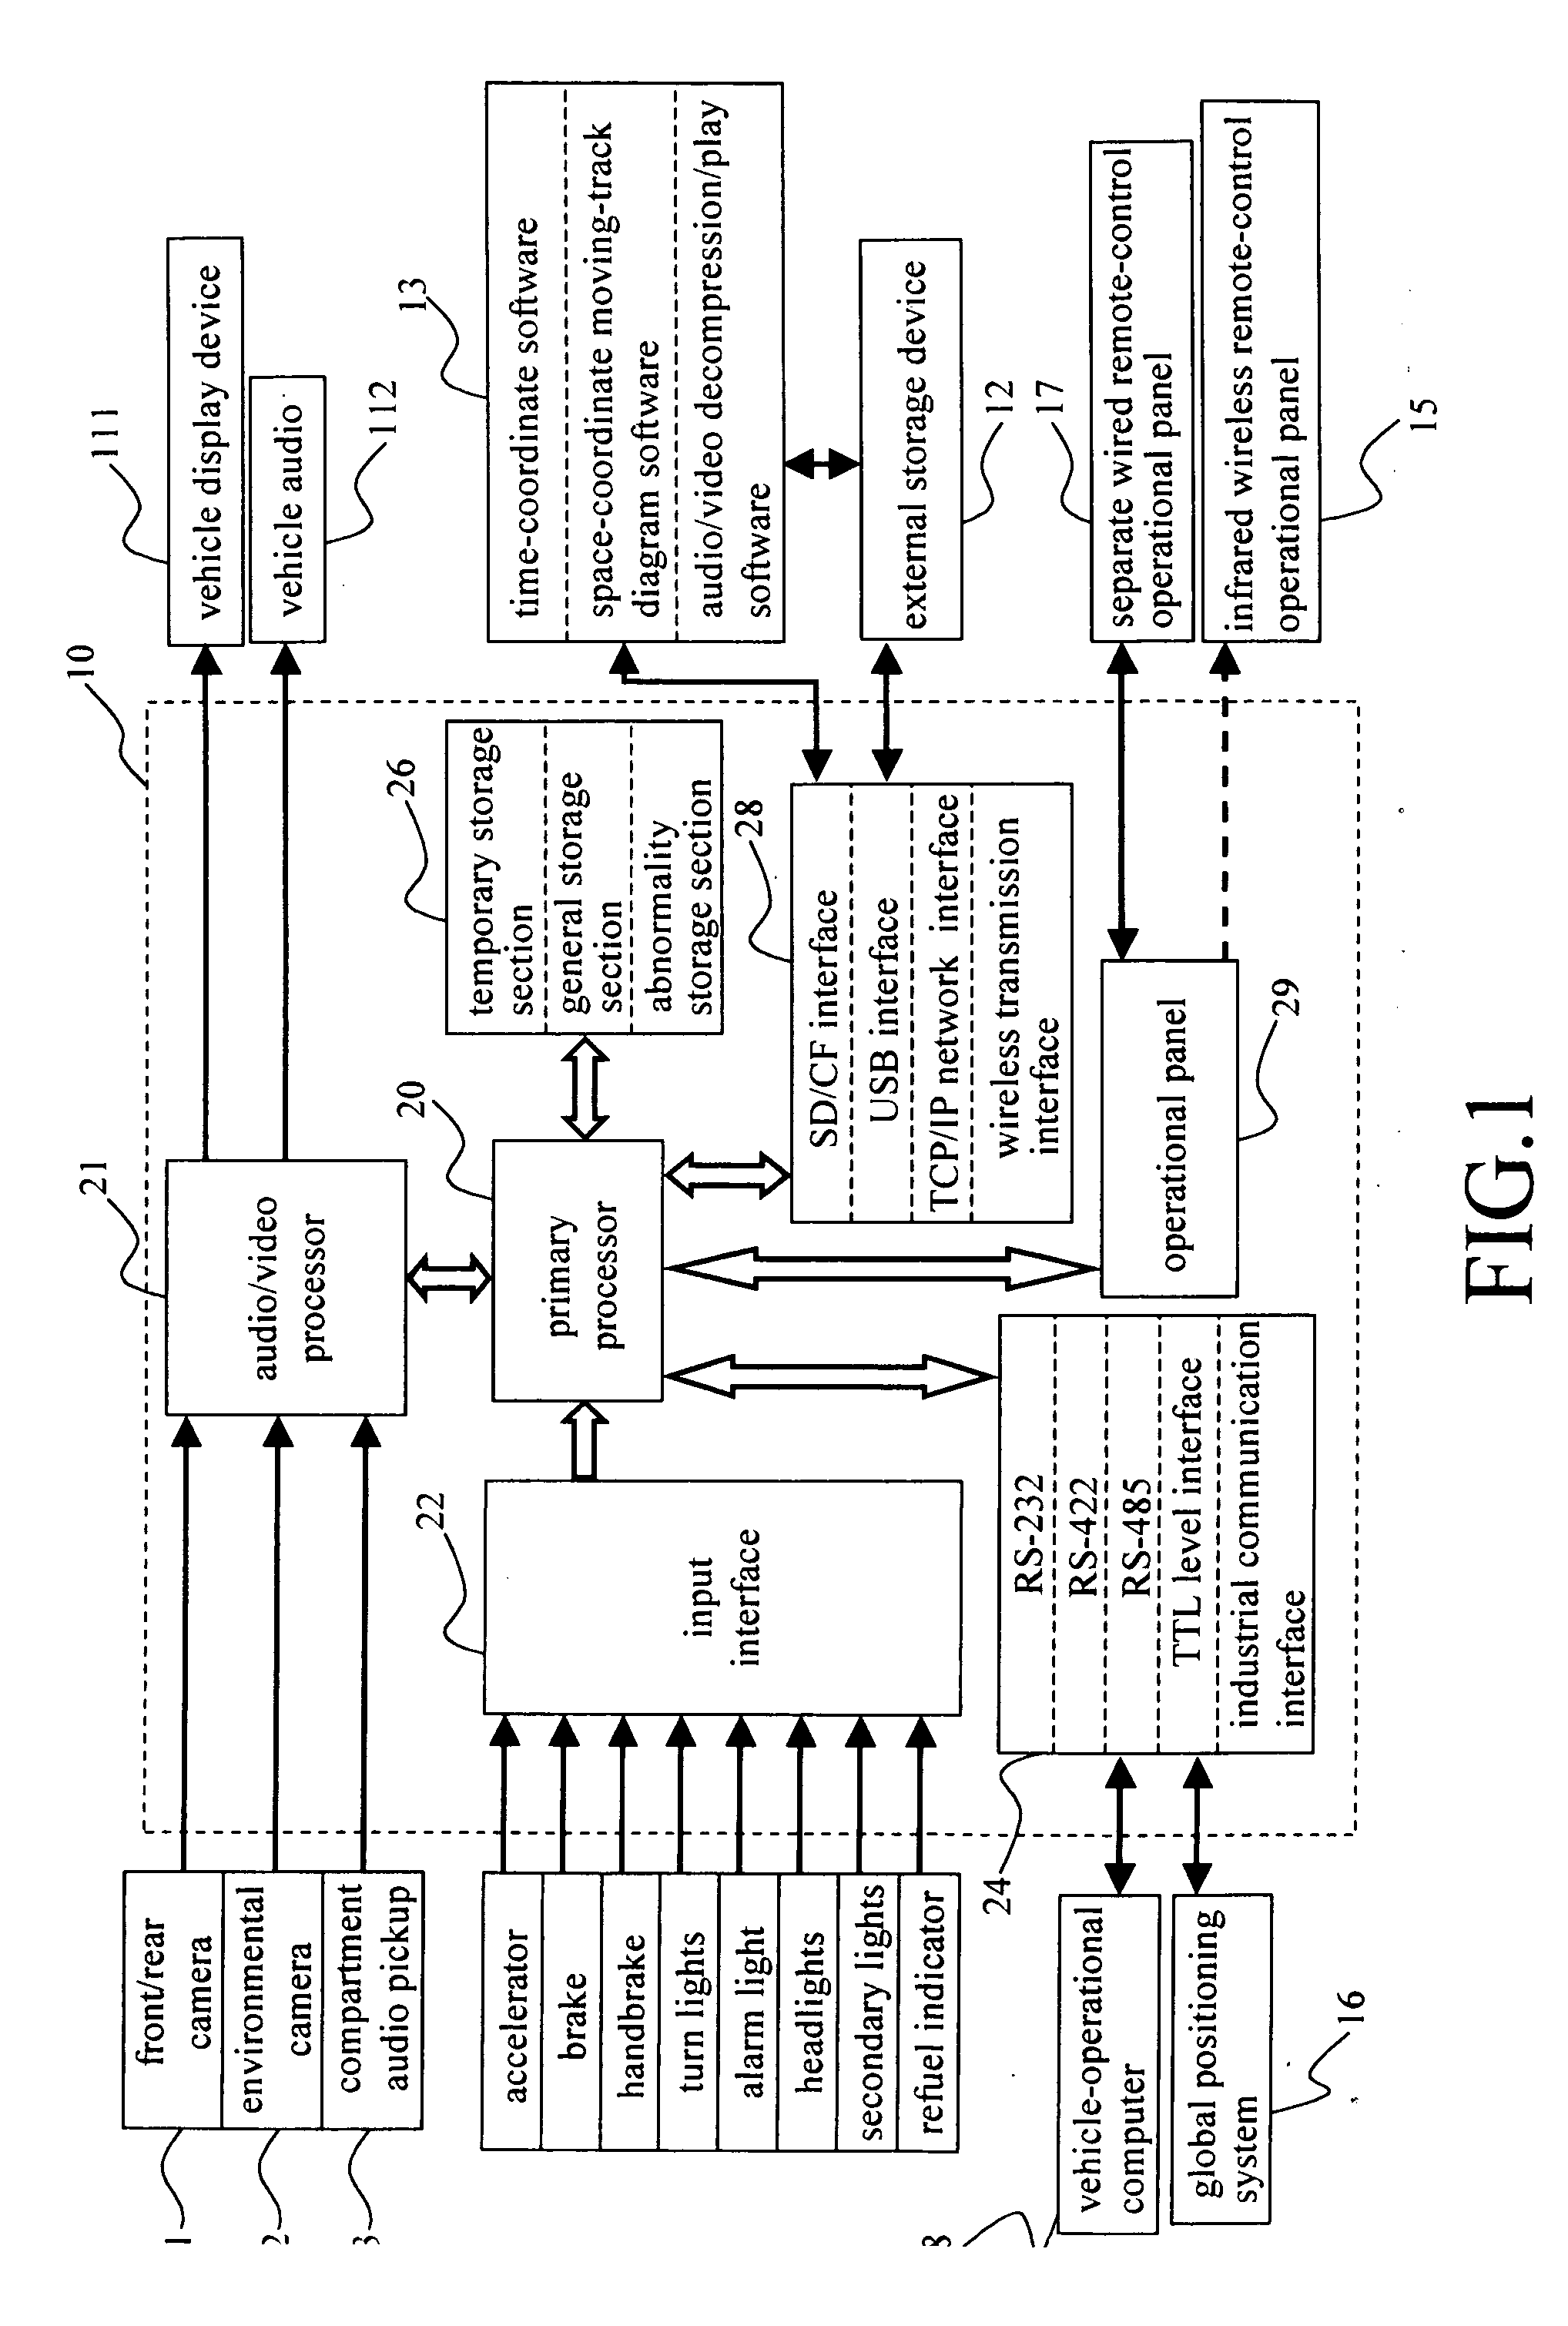 Vehicle running-data recording device capable of recording moving tracks and environmental audio/video data